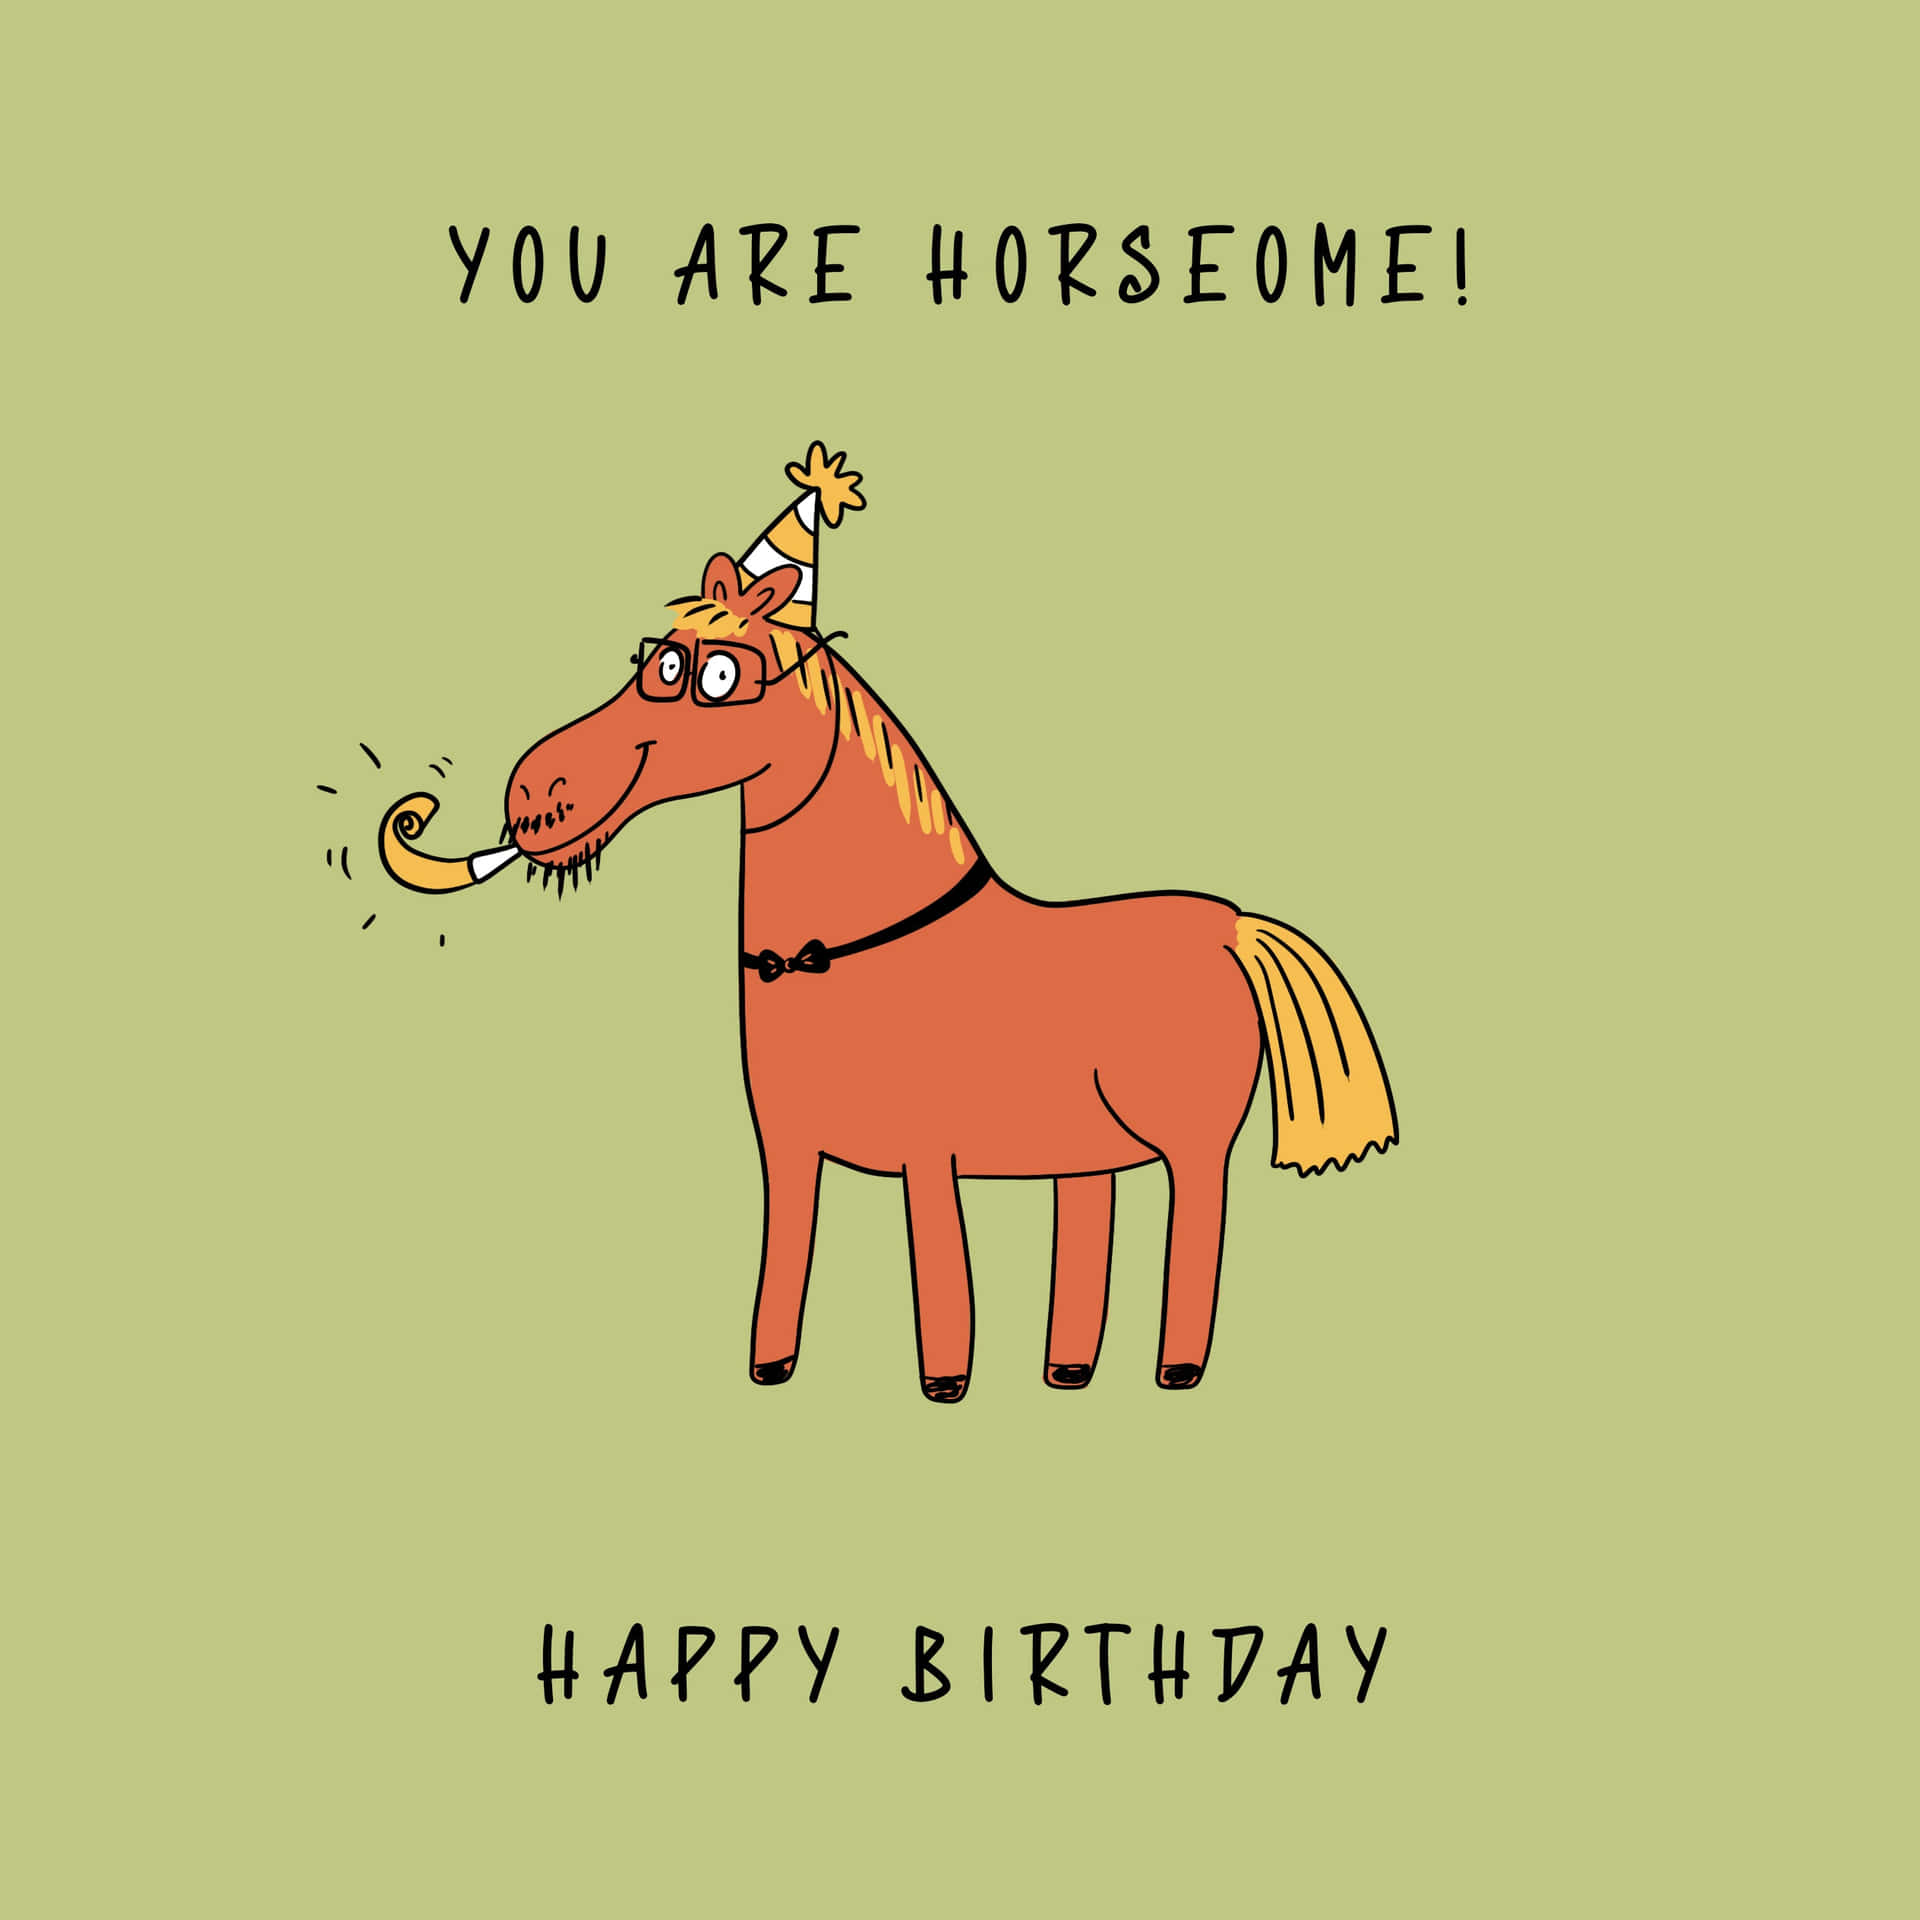 A Birthday Card With A Horse In A Hat